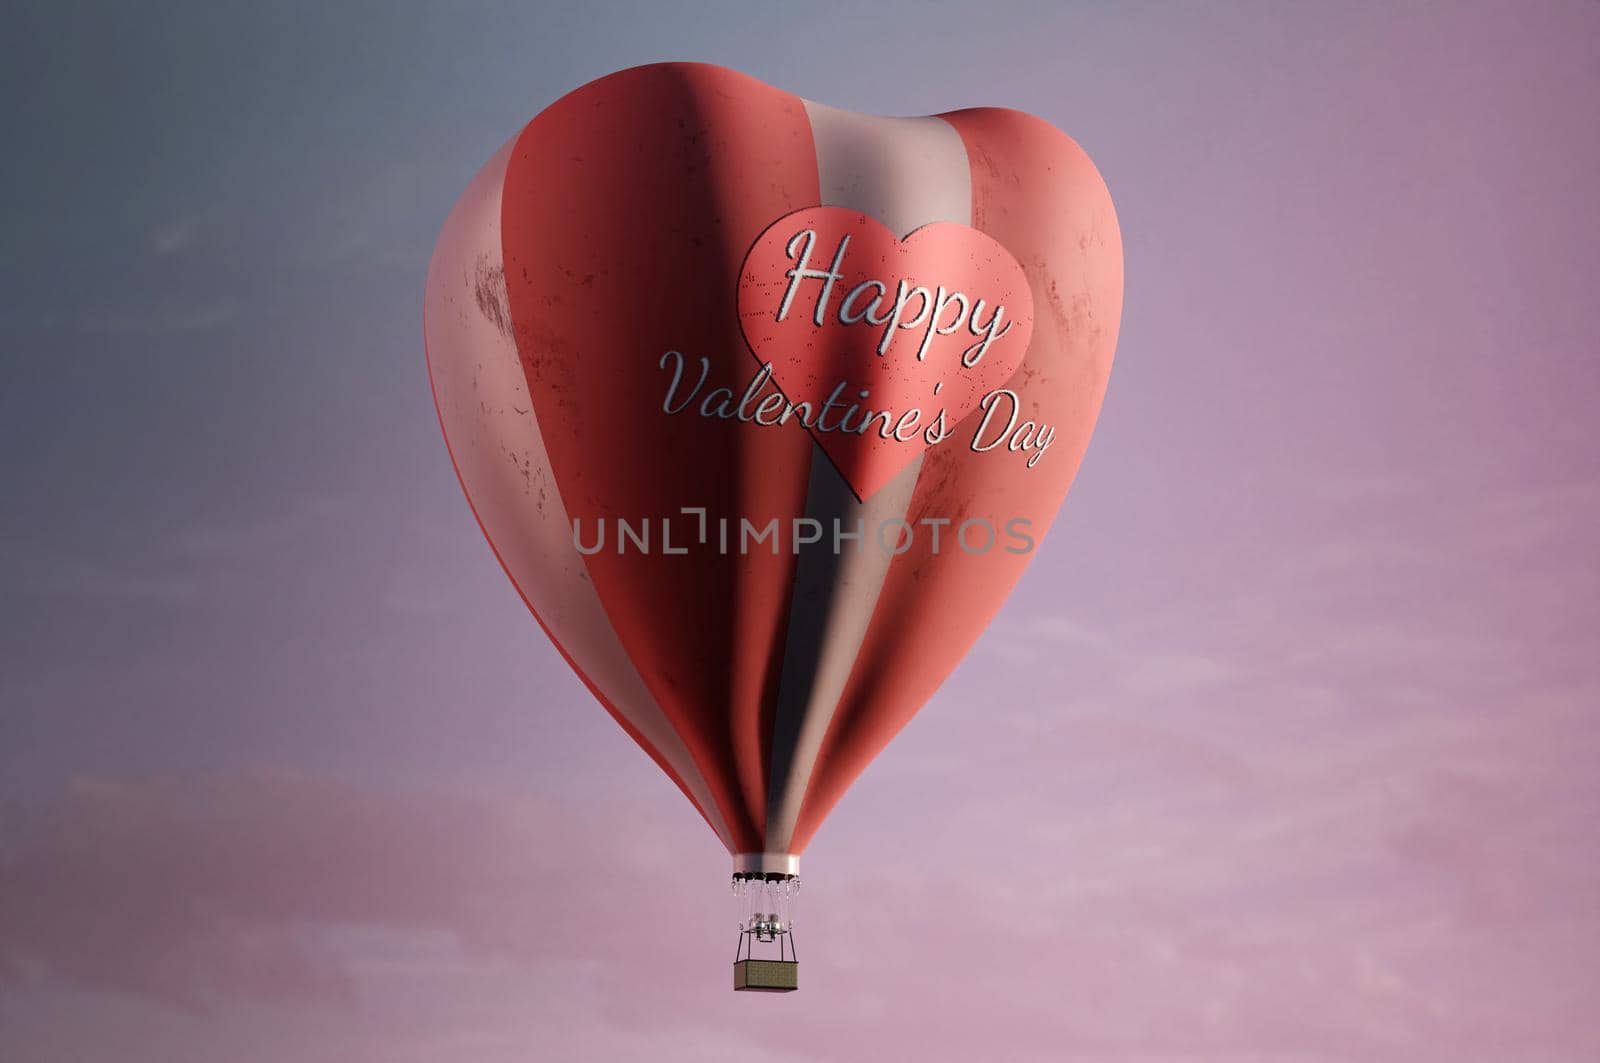 3d illustration. Happy Valentine's Day greeting card with heart shape hot air balloon